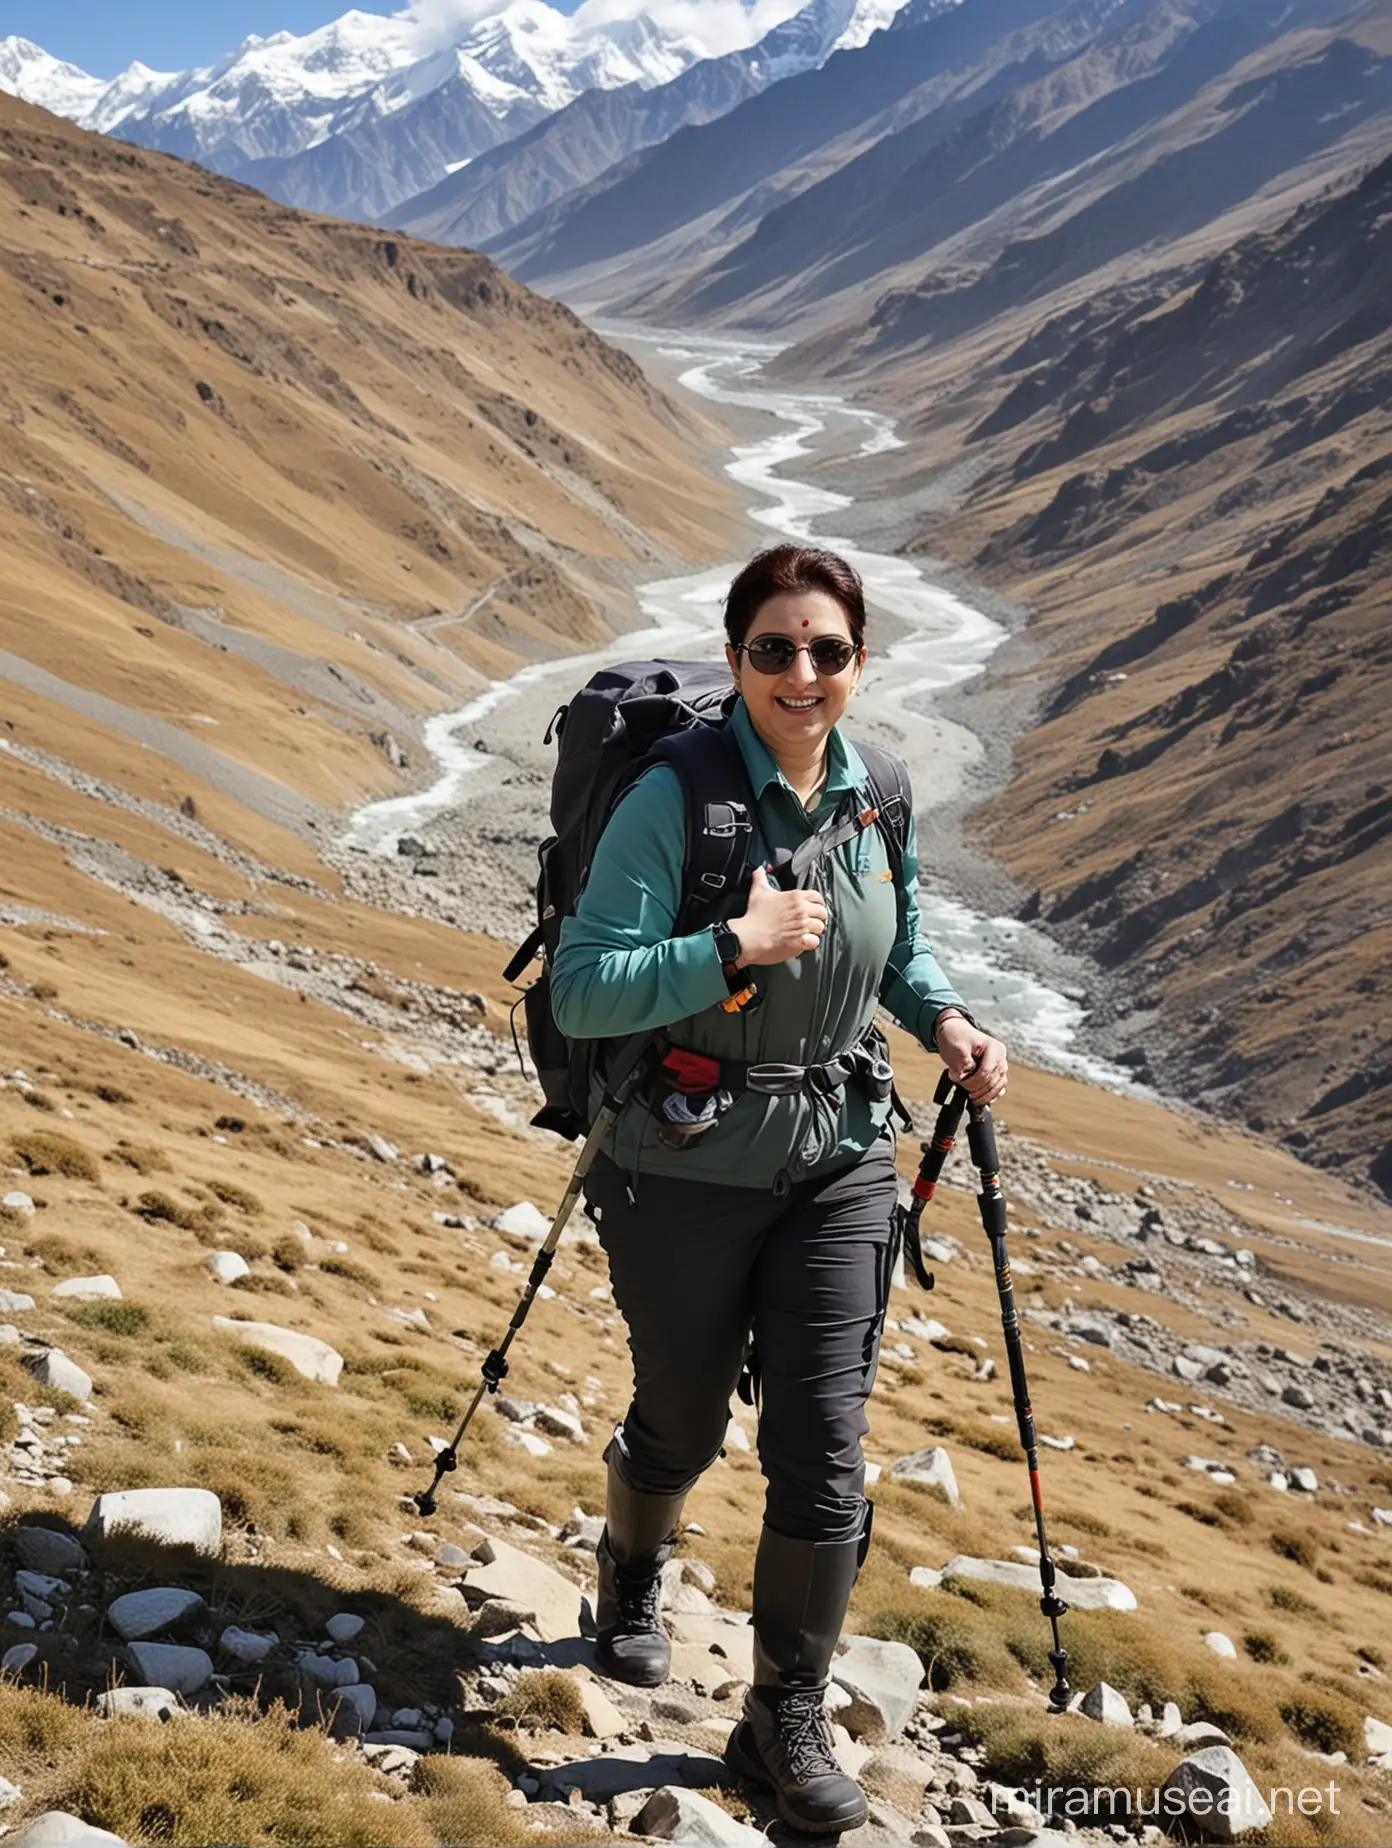 Union Minister Smriti Irani trekking in the majestic Himalayas. Show her dressed in appropriate trekking gear, with a backpack and trekking poles, as she navigates the mountainous terrain with determination and grace. The backdrop should showcase the awe-inspiring beauty of the Himalayan landscape, emphasizing her adventurous spirit and connection with nature. This image should capture the essence of leadership and exploration in a serene and inspiring setting